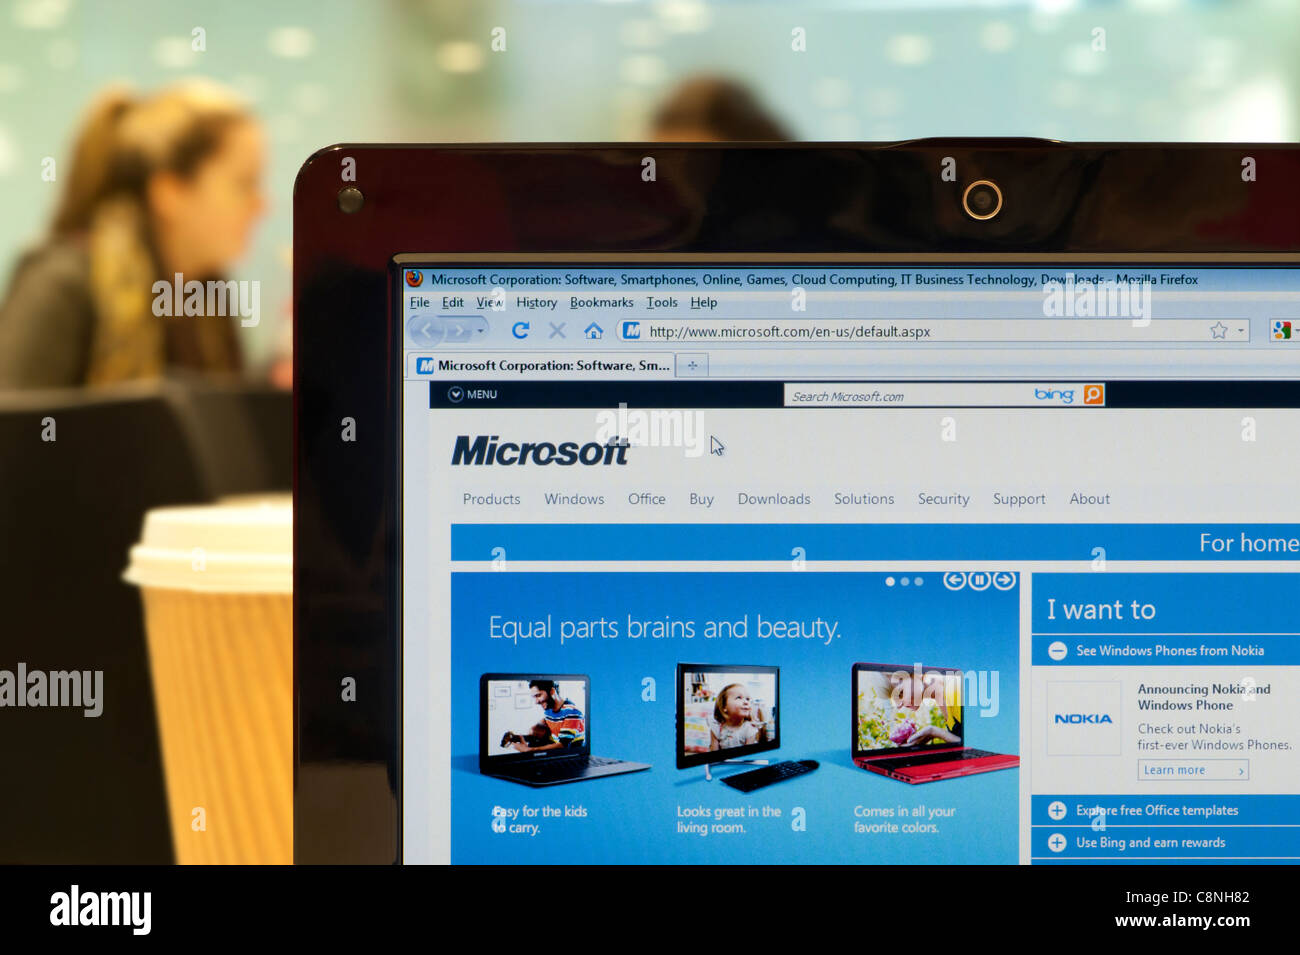 The Microsoft website shot in a coffee shop environment (Editorial use only: print, TV, e-book and editorial website). Stock Photo